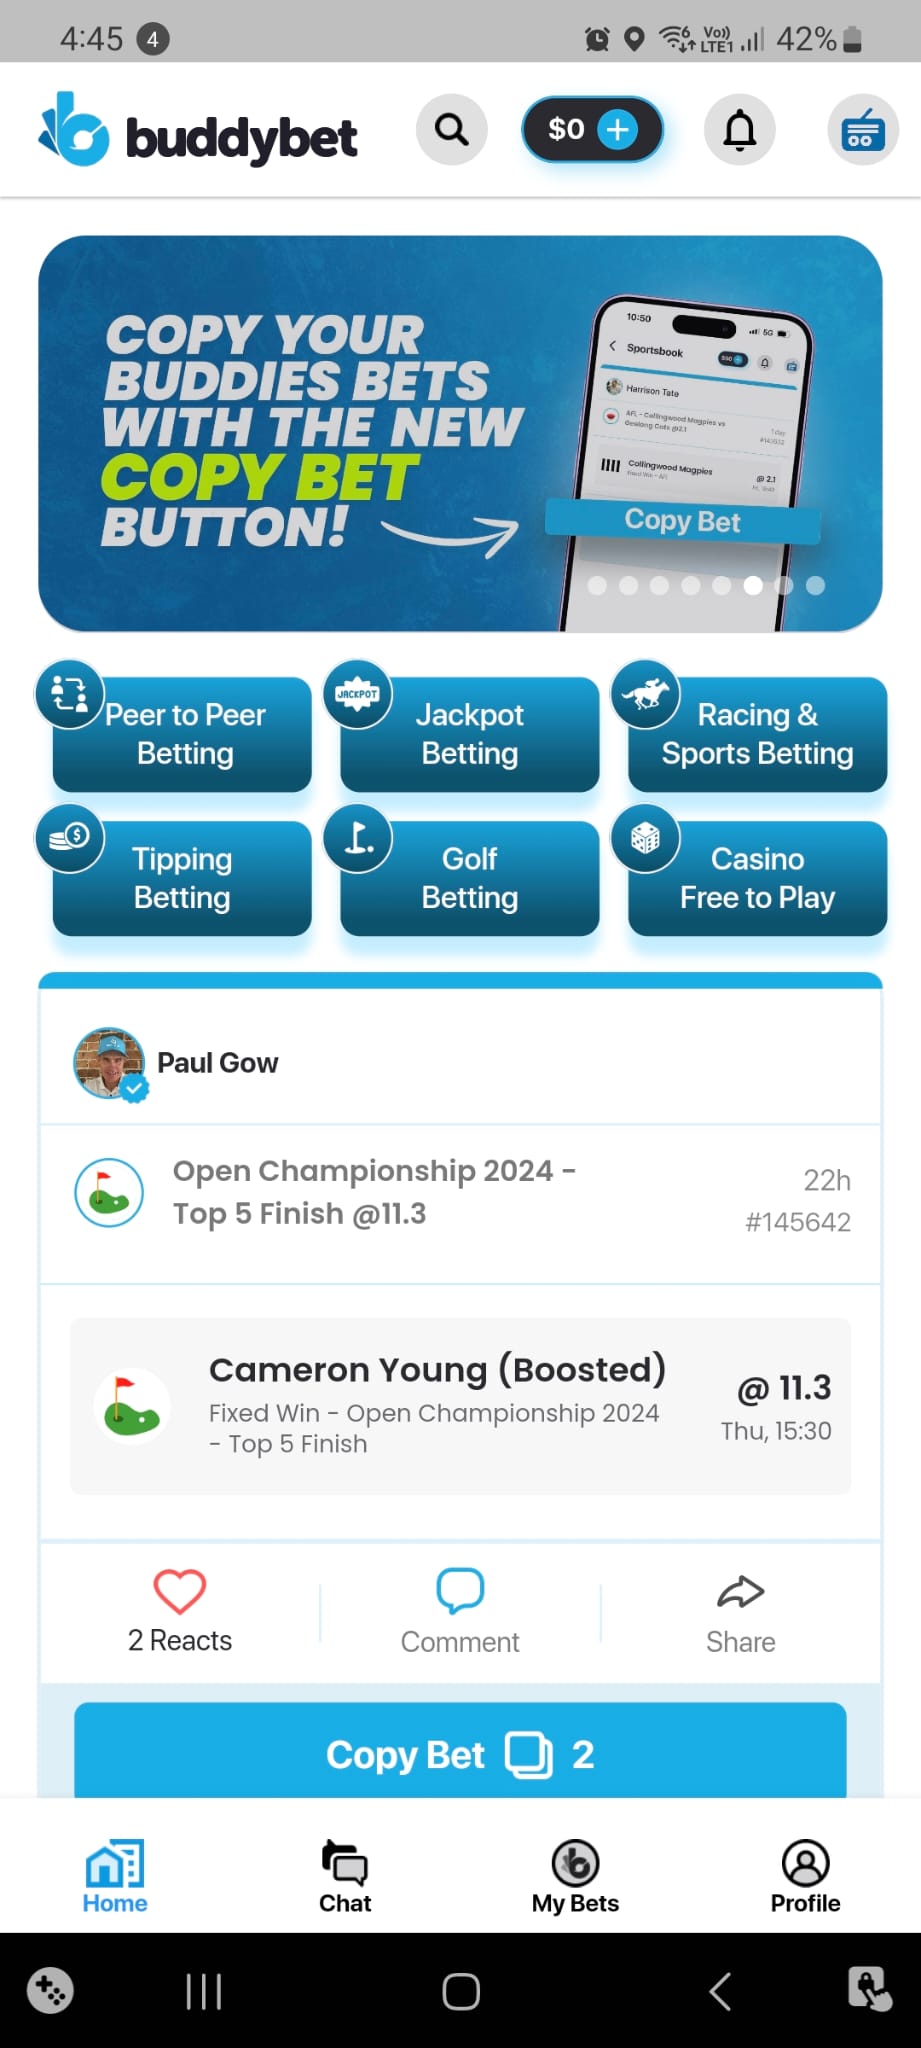 BuddyBet mobile app showing the main betting interface.